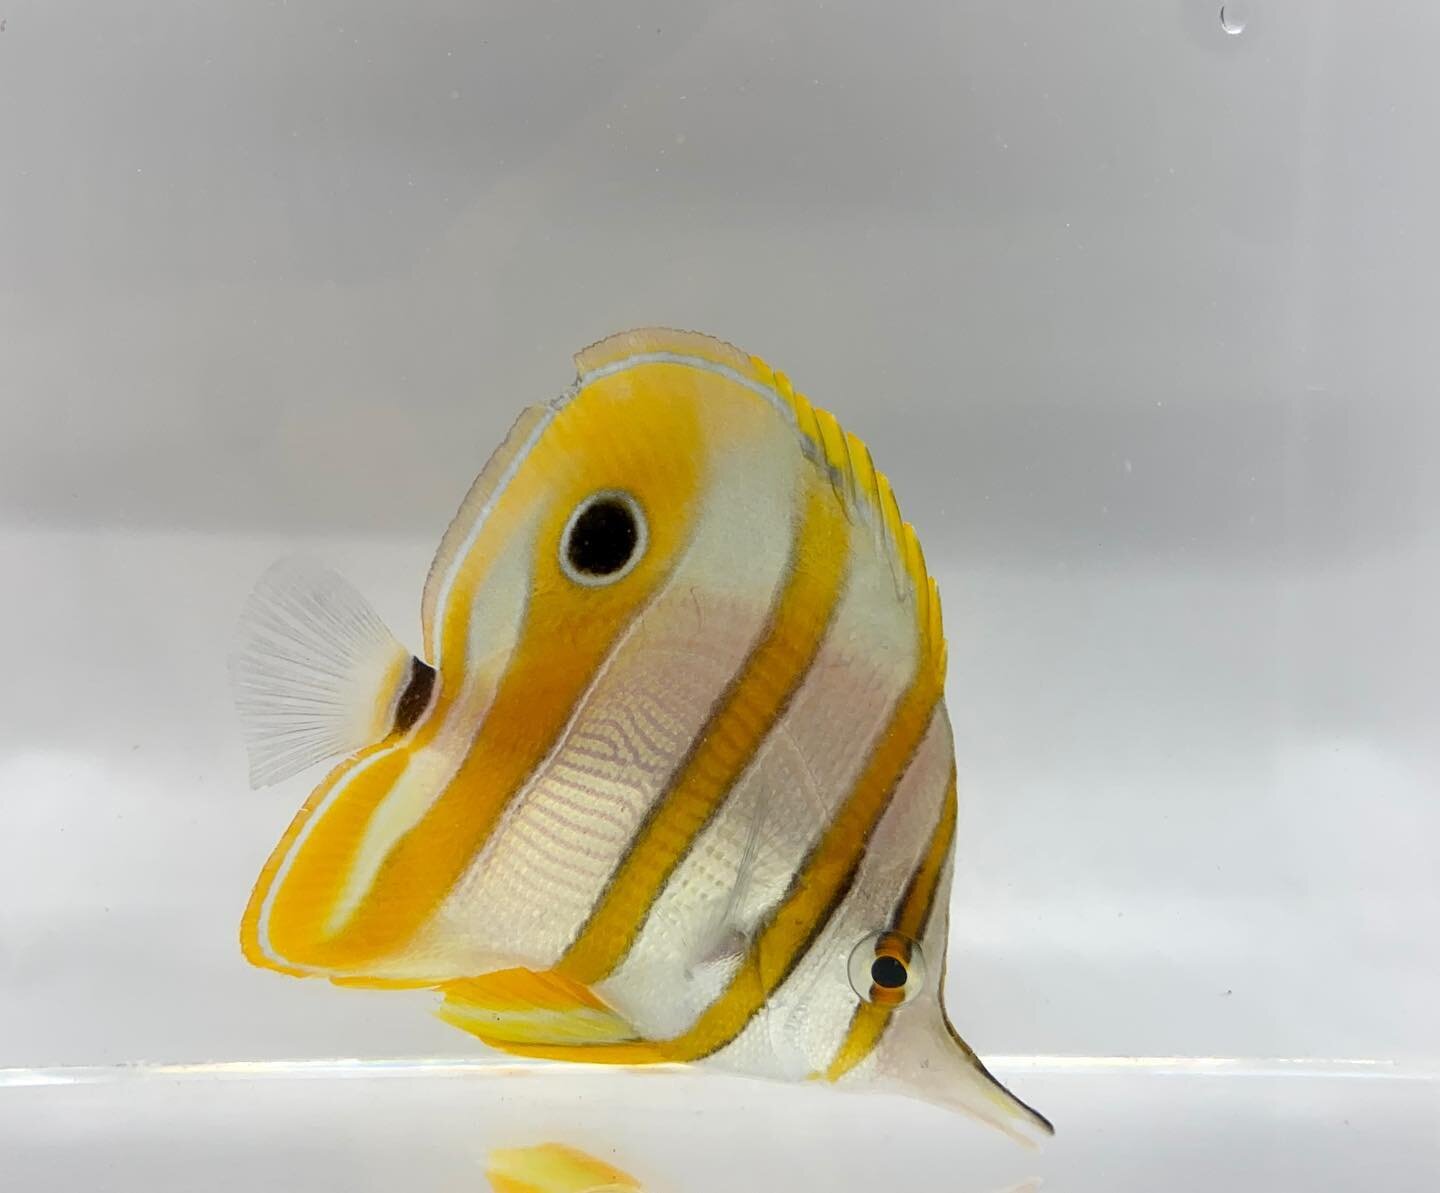 Have you been into the store lately to see what we&rsquo;ve gotten in? Here&rsquo;s a sneak peek at some of the unique salt water fish! Visit our Facebook for the full post! 
.
.
.
#copperbandbutterfly #morishidle #goldrimkoletang #koletang #bristlet